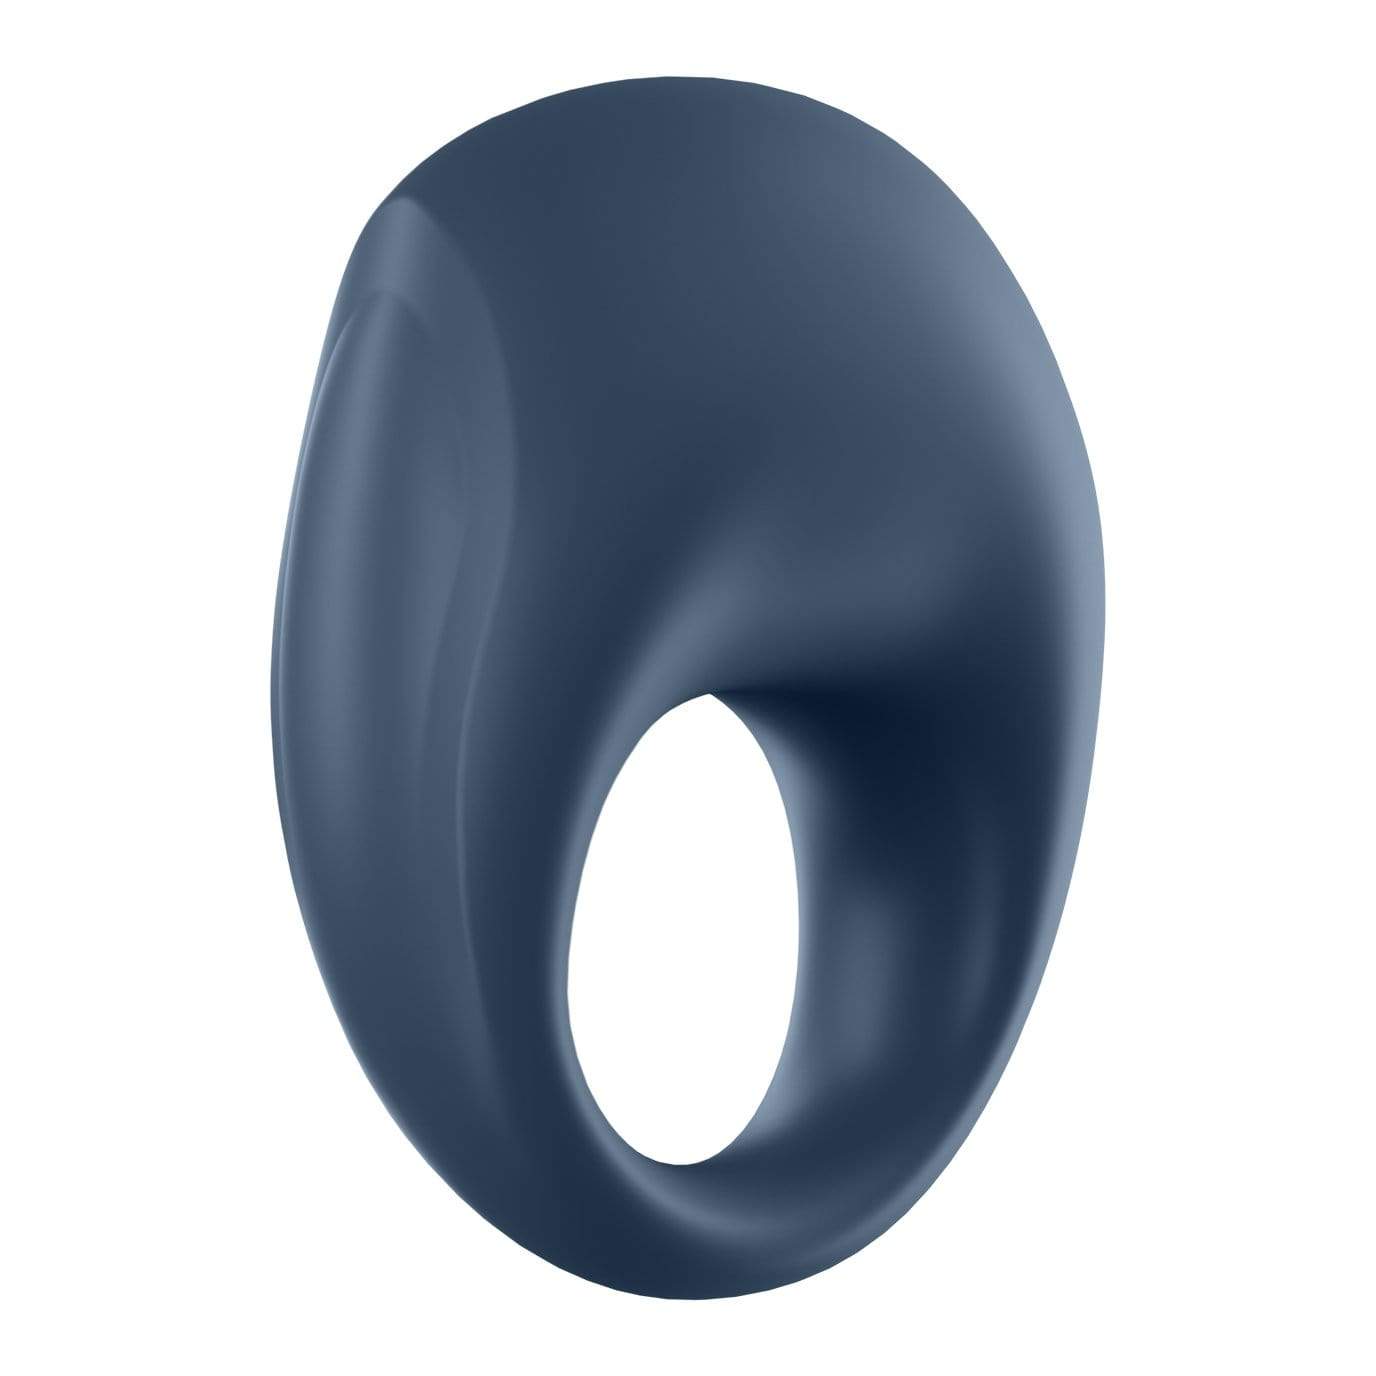 Satisfyer - Strong One App-Controlled Silicone Cock Ring (Blue Black) Silicone Cock Ring (Vibration) Rechargeable 4061504001968 CherryAffairs